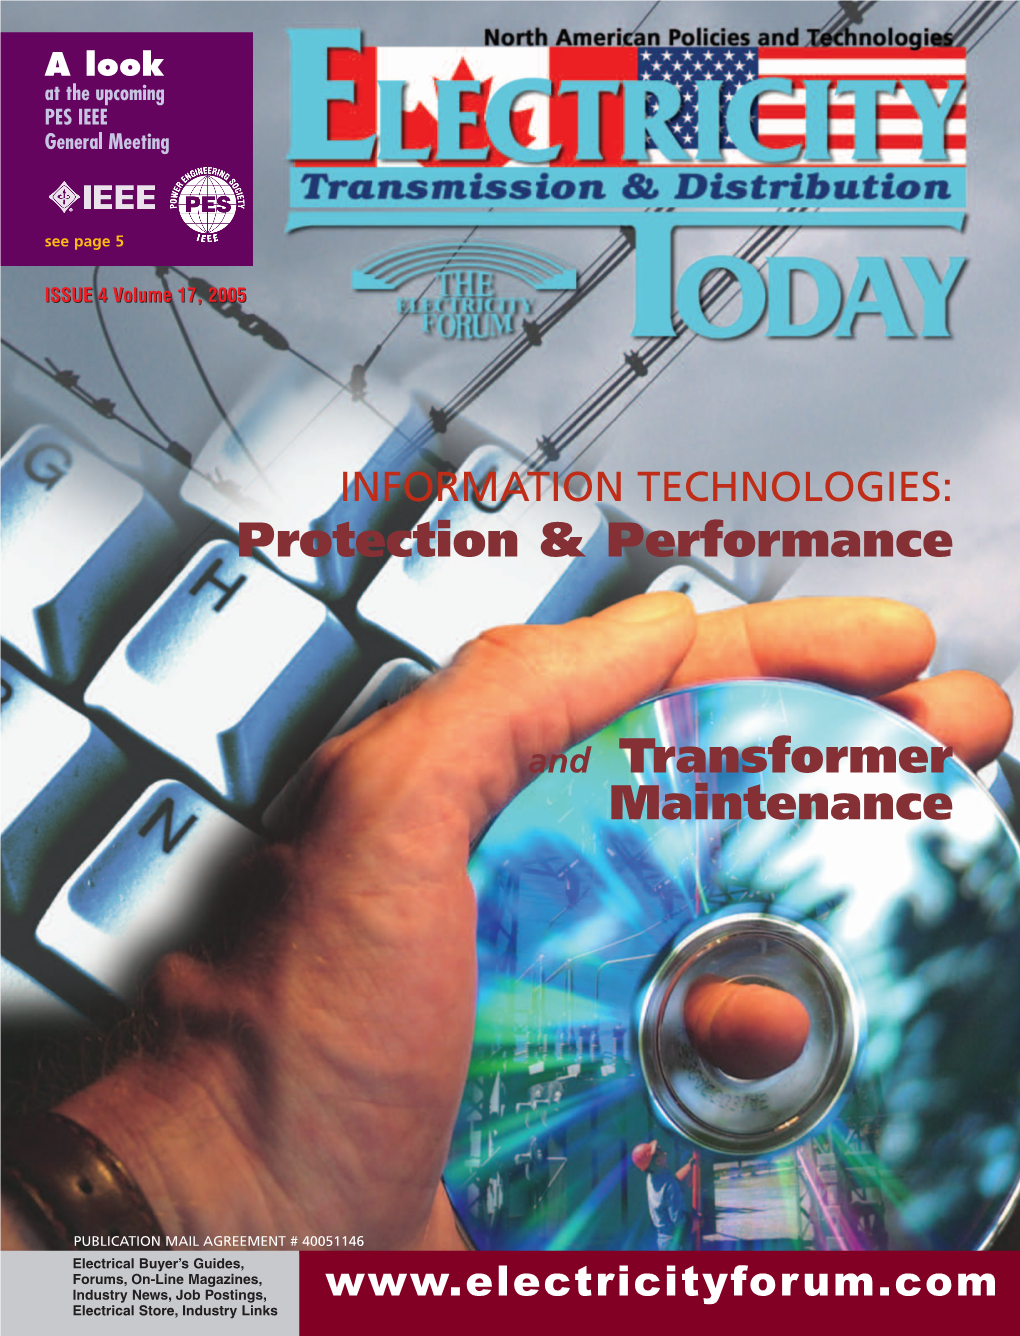 Electricity Today Issue 4 Volume 17, 2005